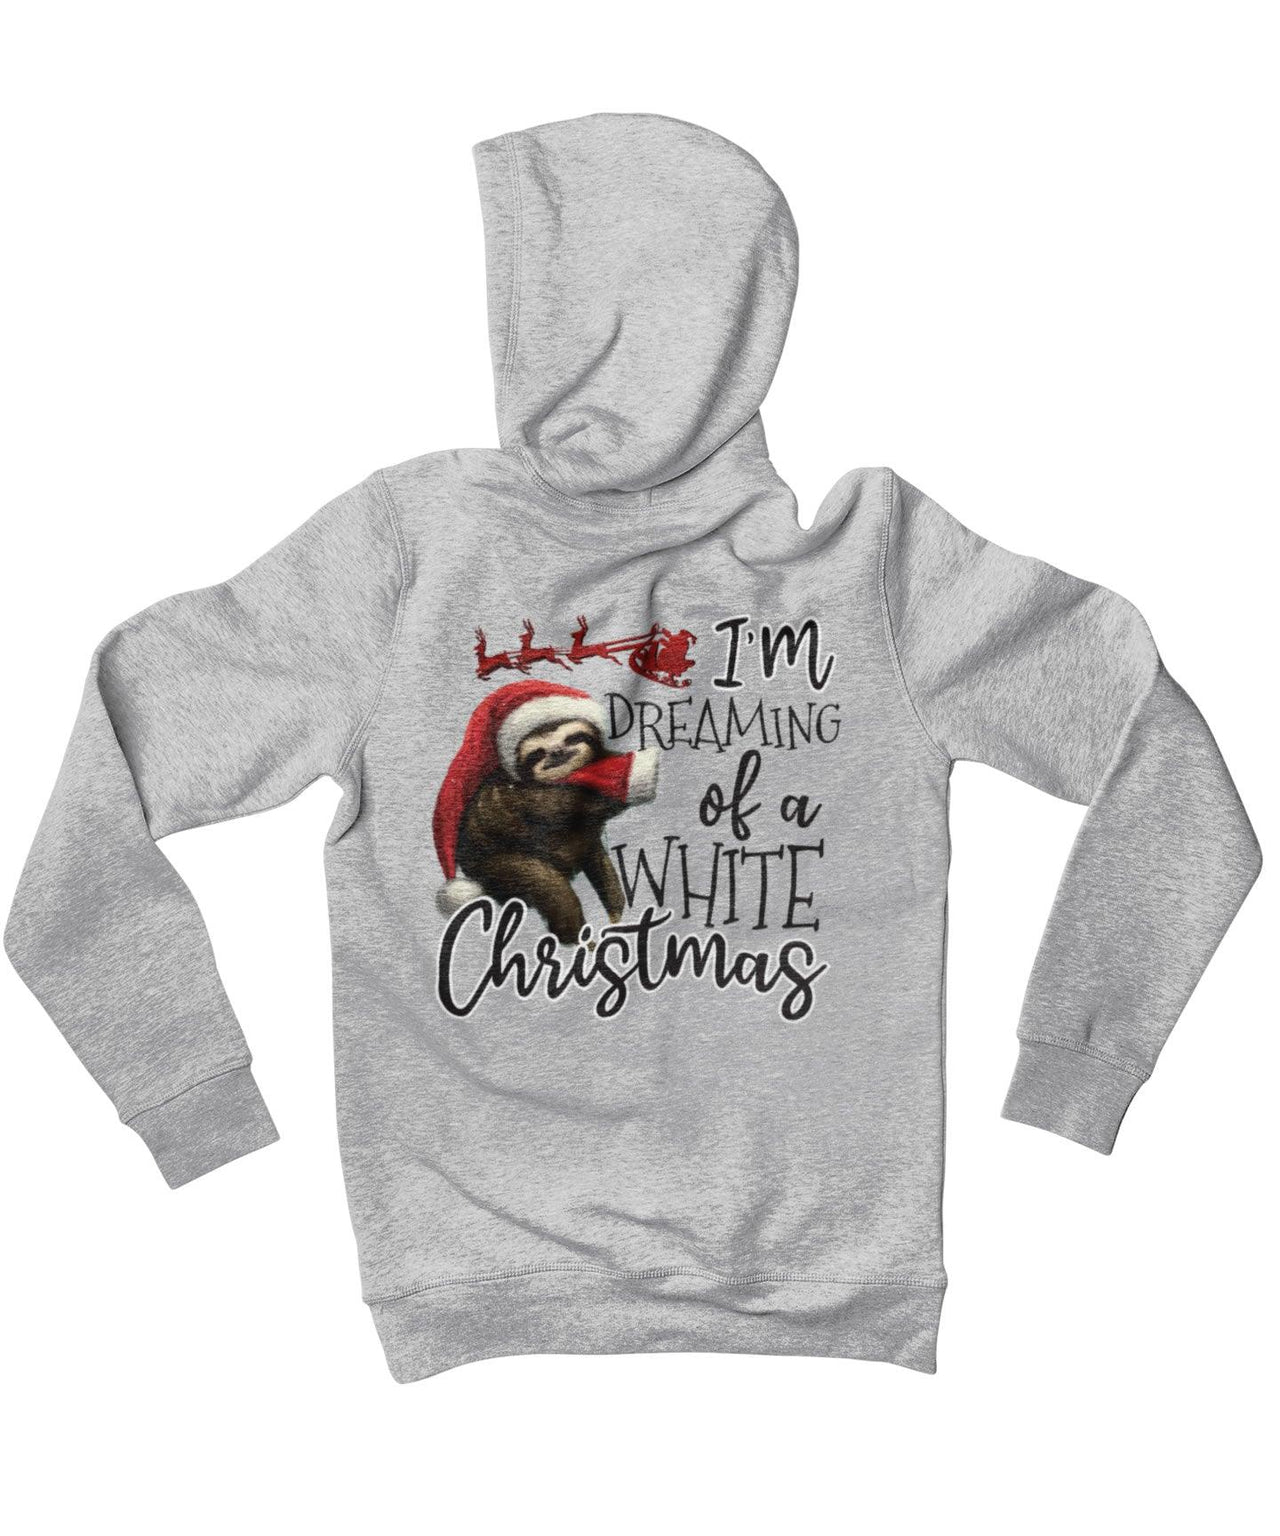 Sloth Dreaming Of A White Christmas Back Printed Sloth Hoodie For Men and Women 8Ball